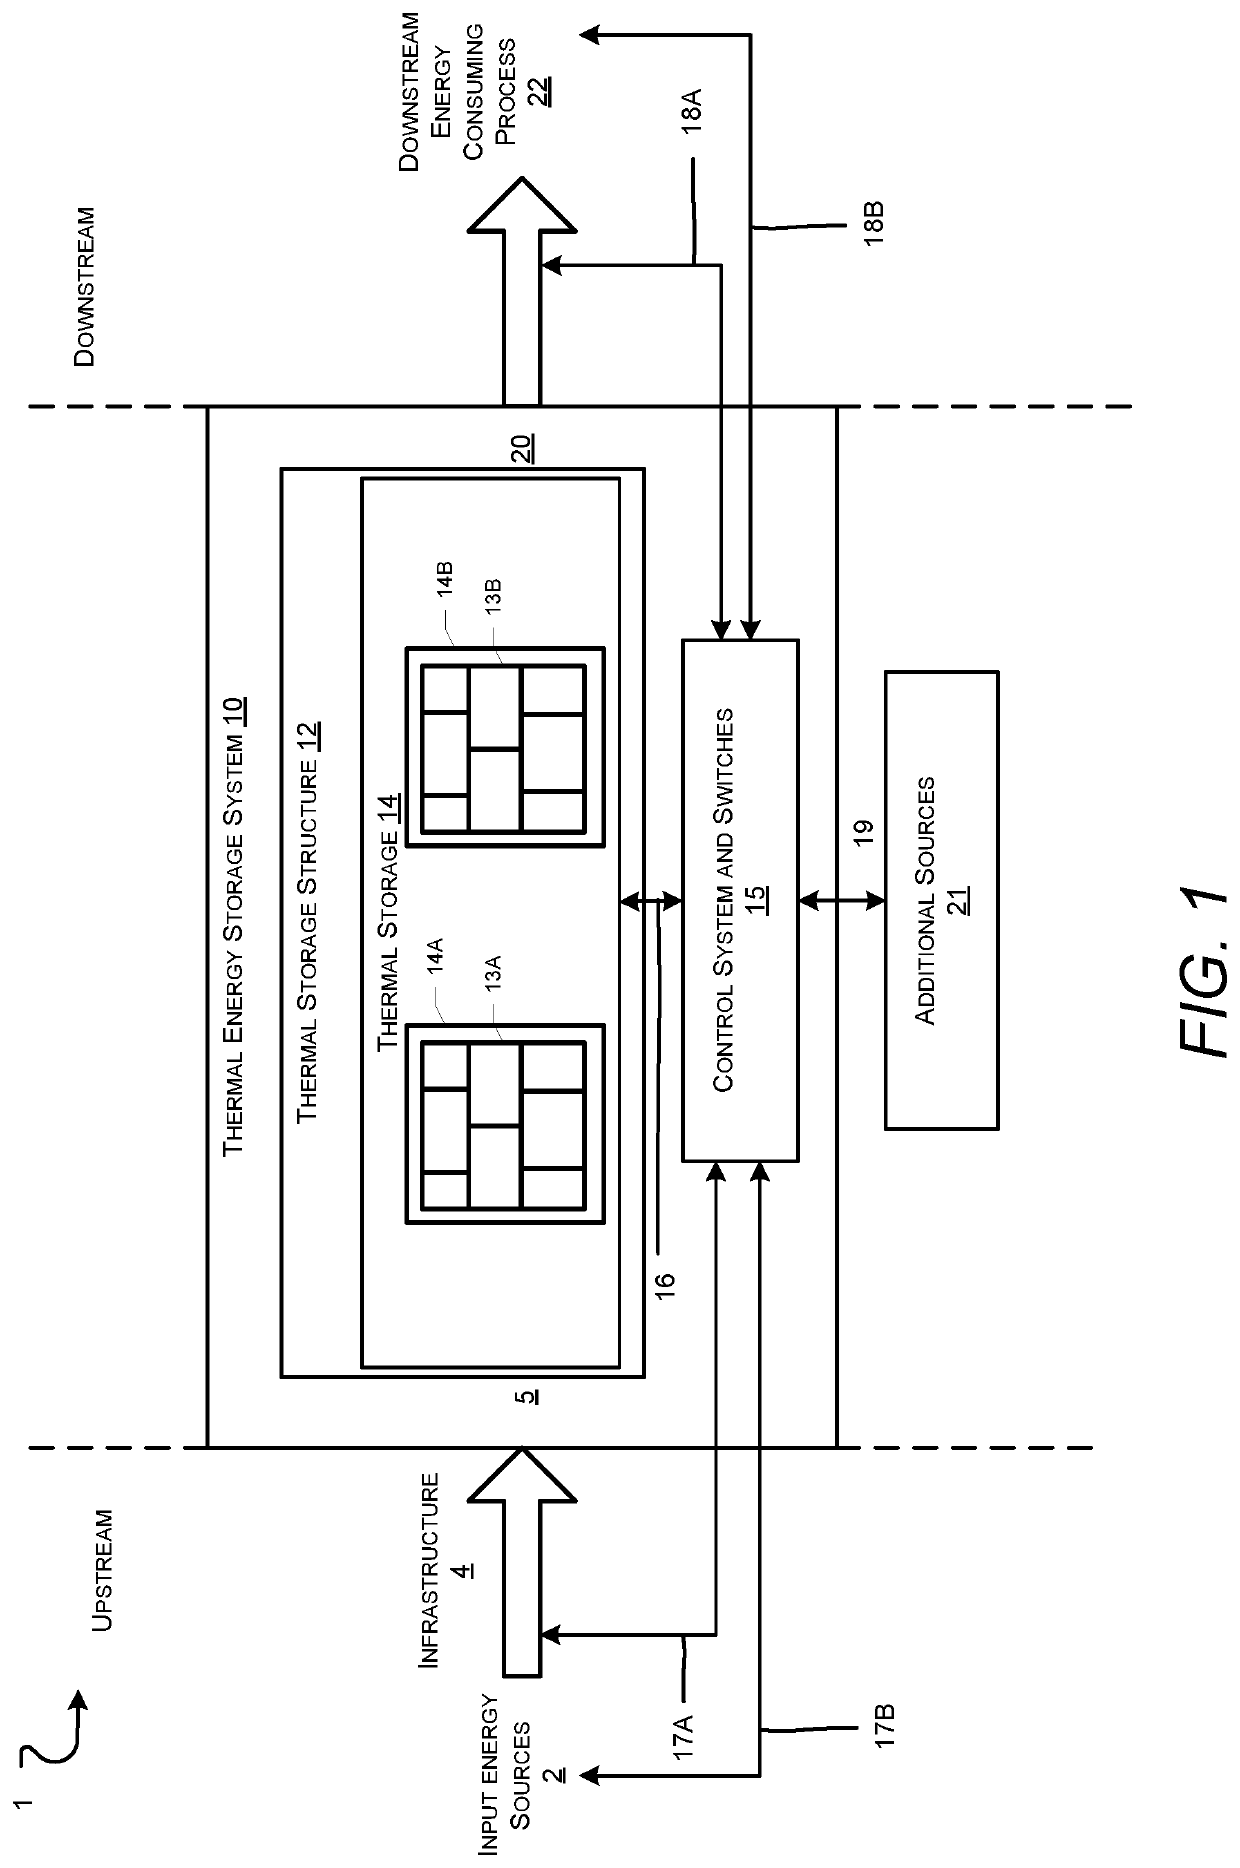 Thermal Energy Storage System With Heat Discharge System to Prevent Thermal Runaway